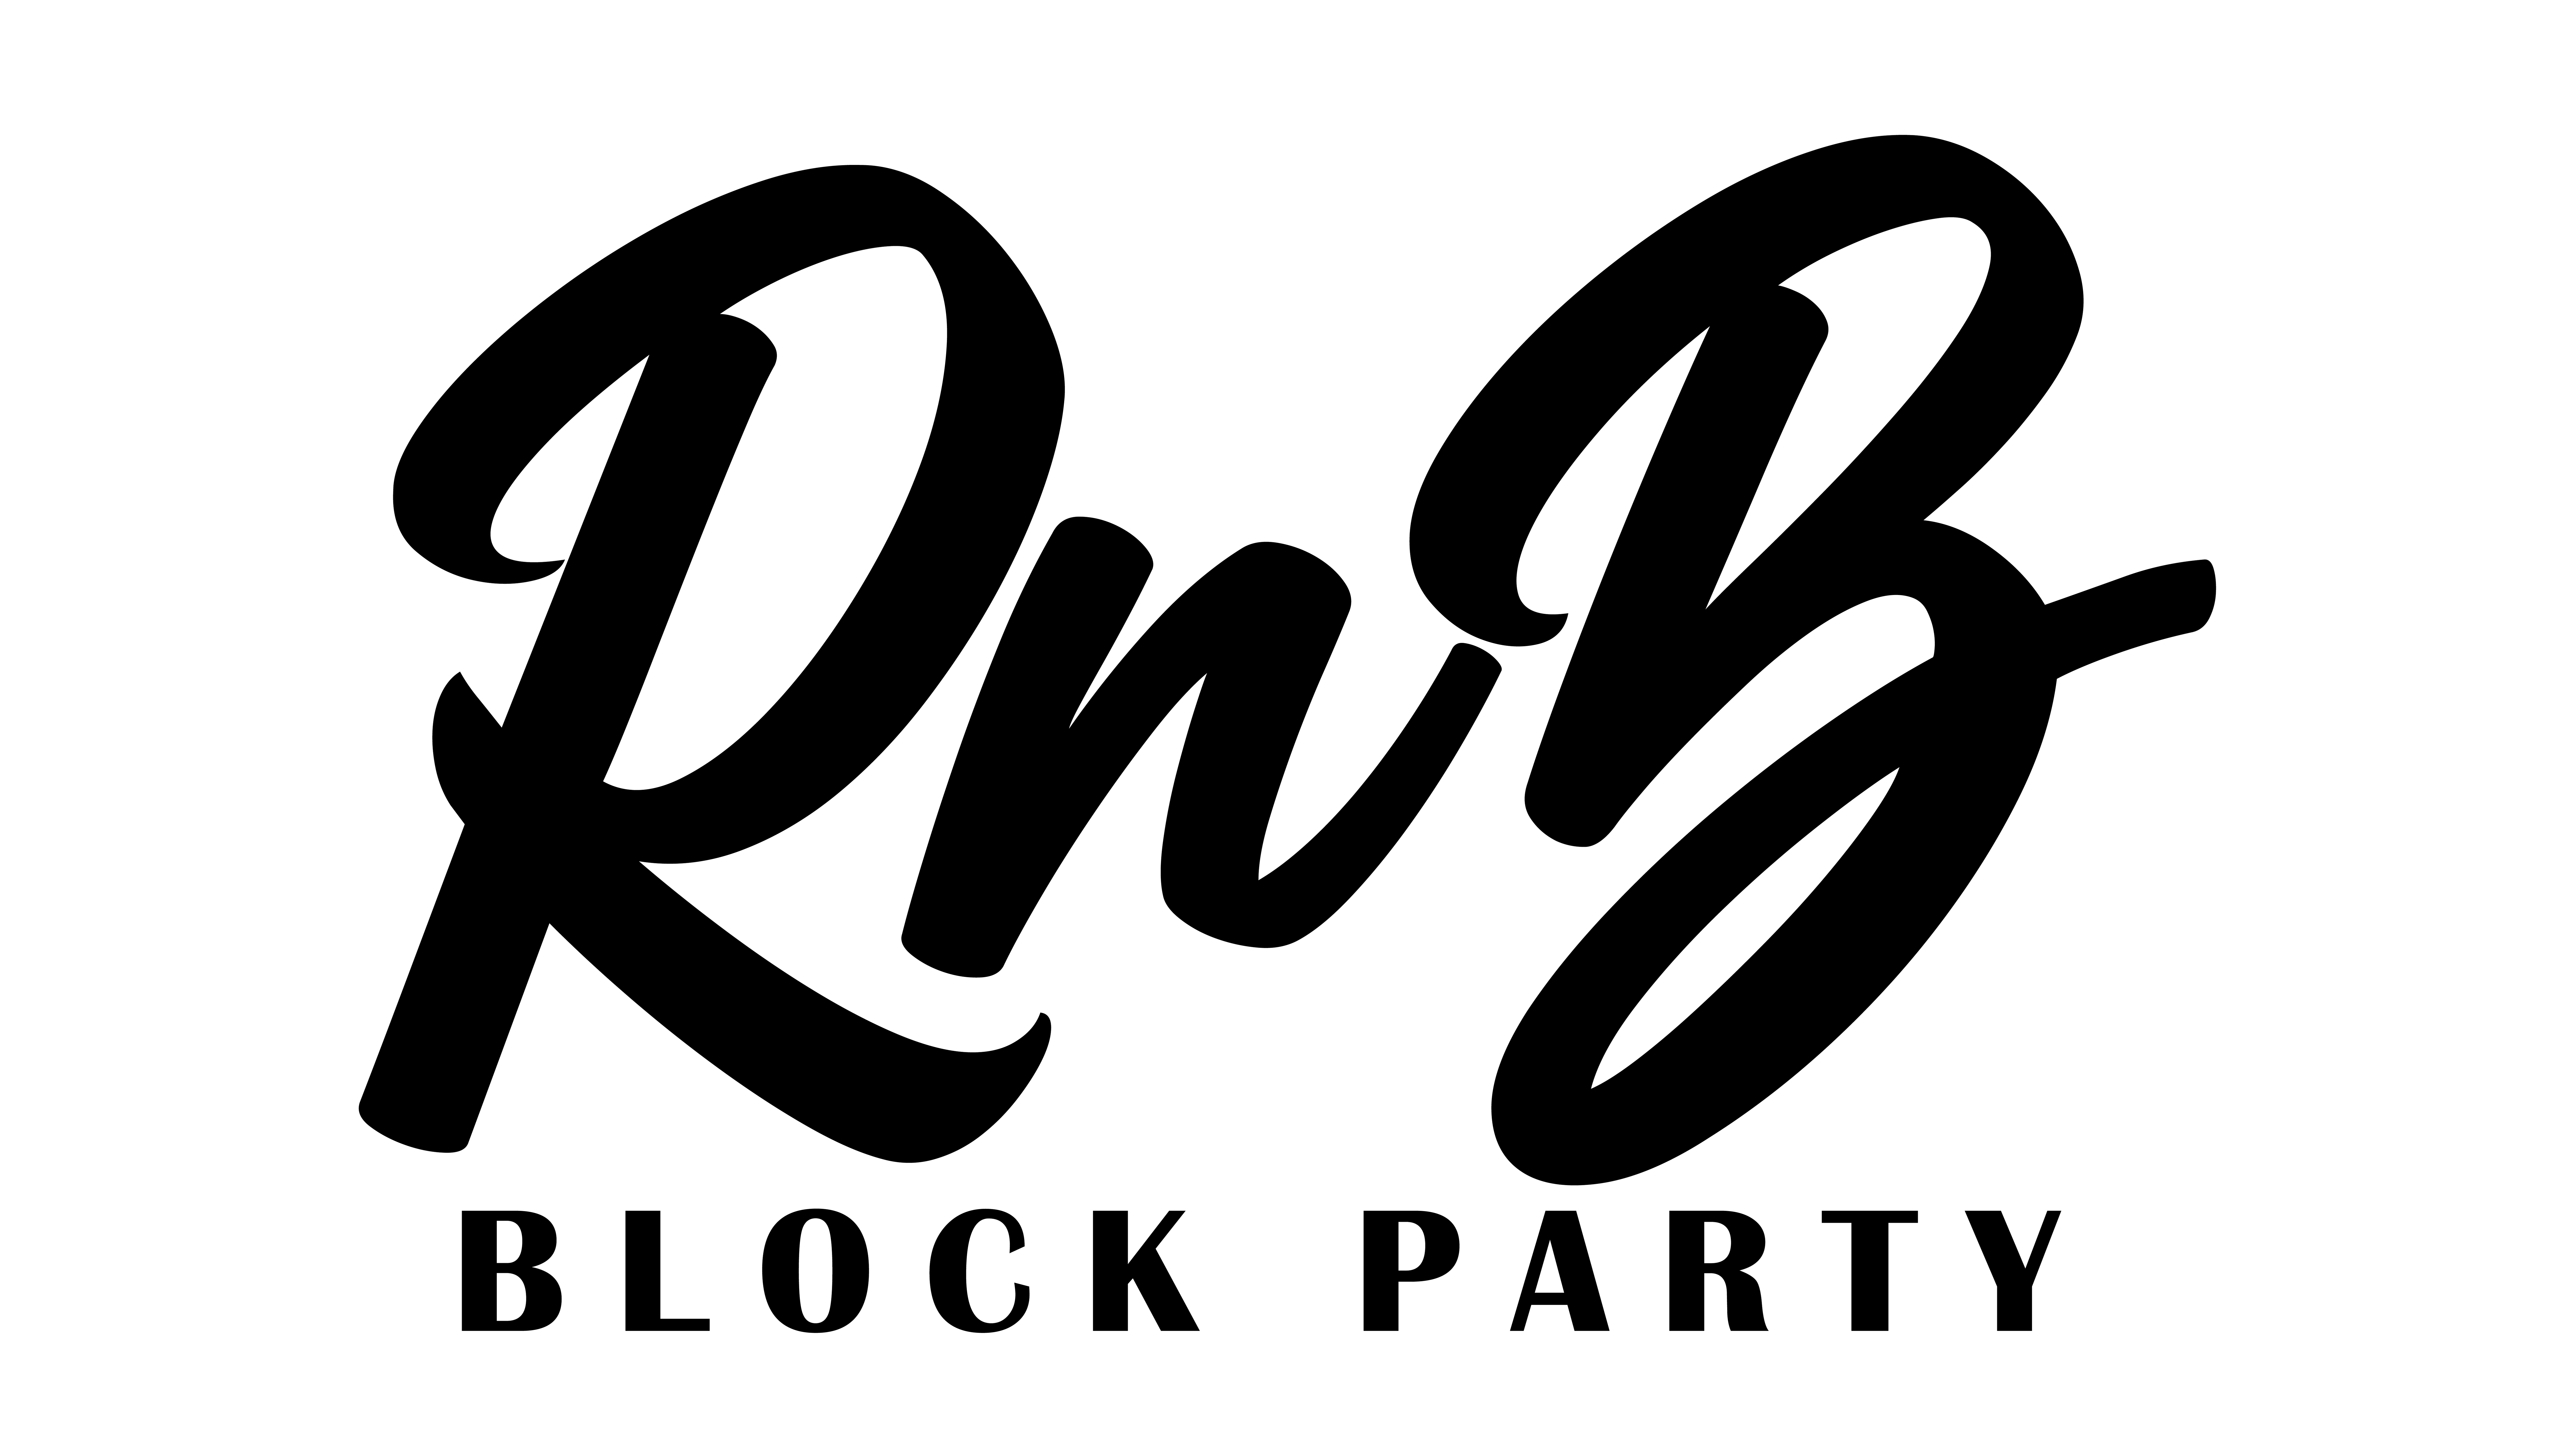 RnB Block Party at Scope Plaza